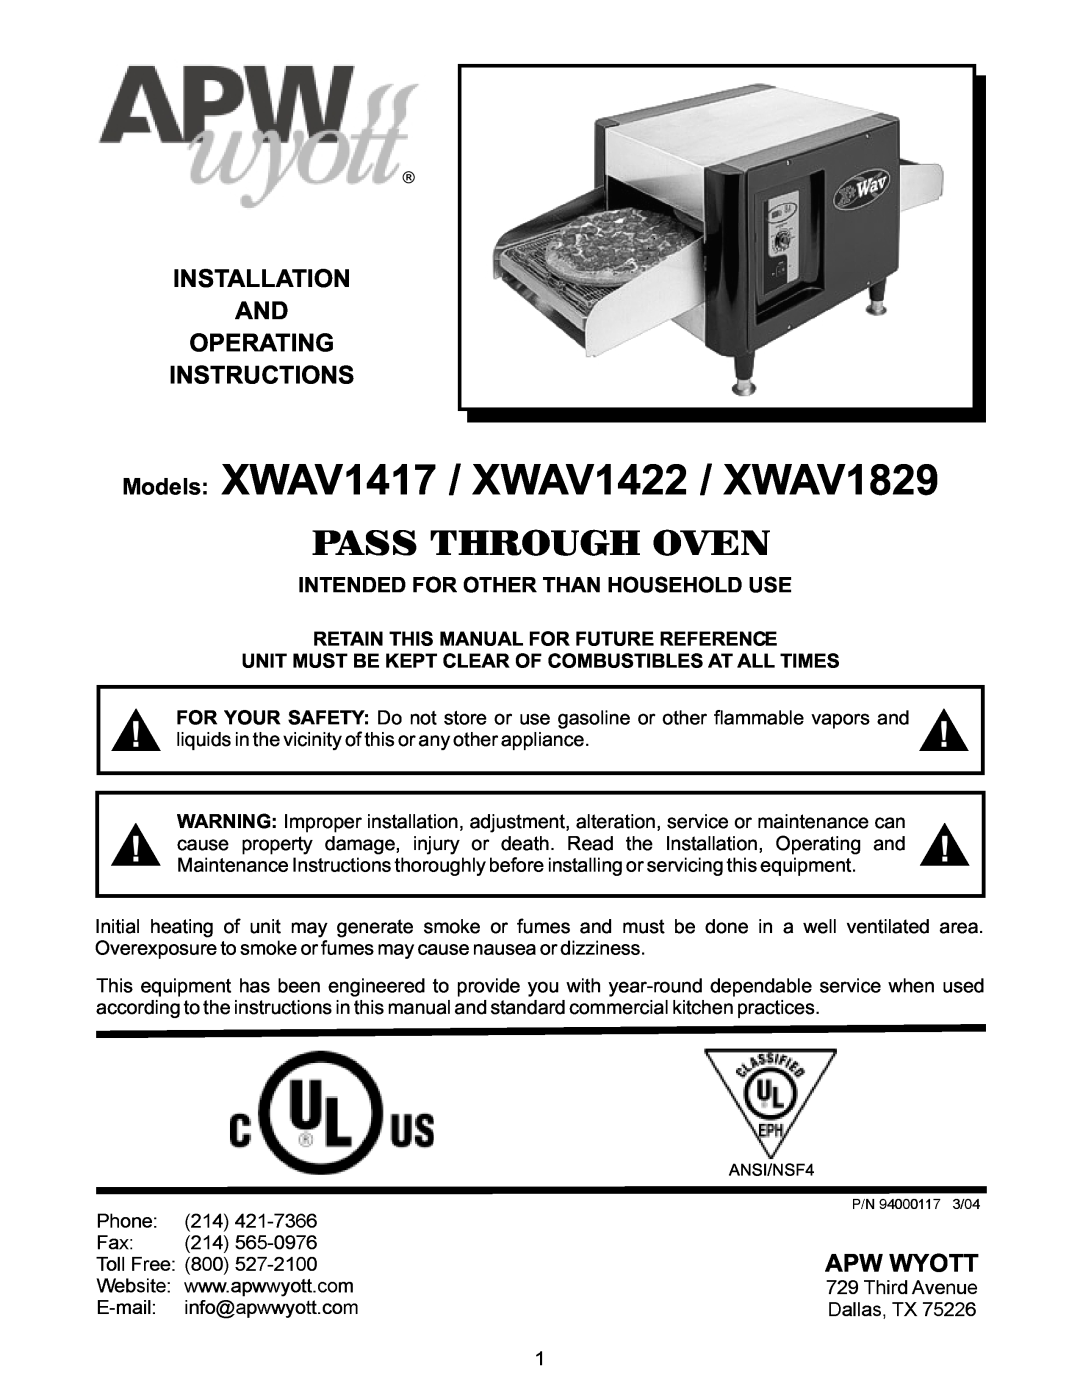 APW Wyott XWAV1422 manual 41736, Installation And Operating Instructions, Phone, Intended For Other Than Household Use 